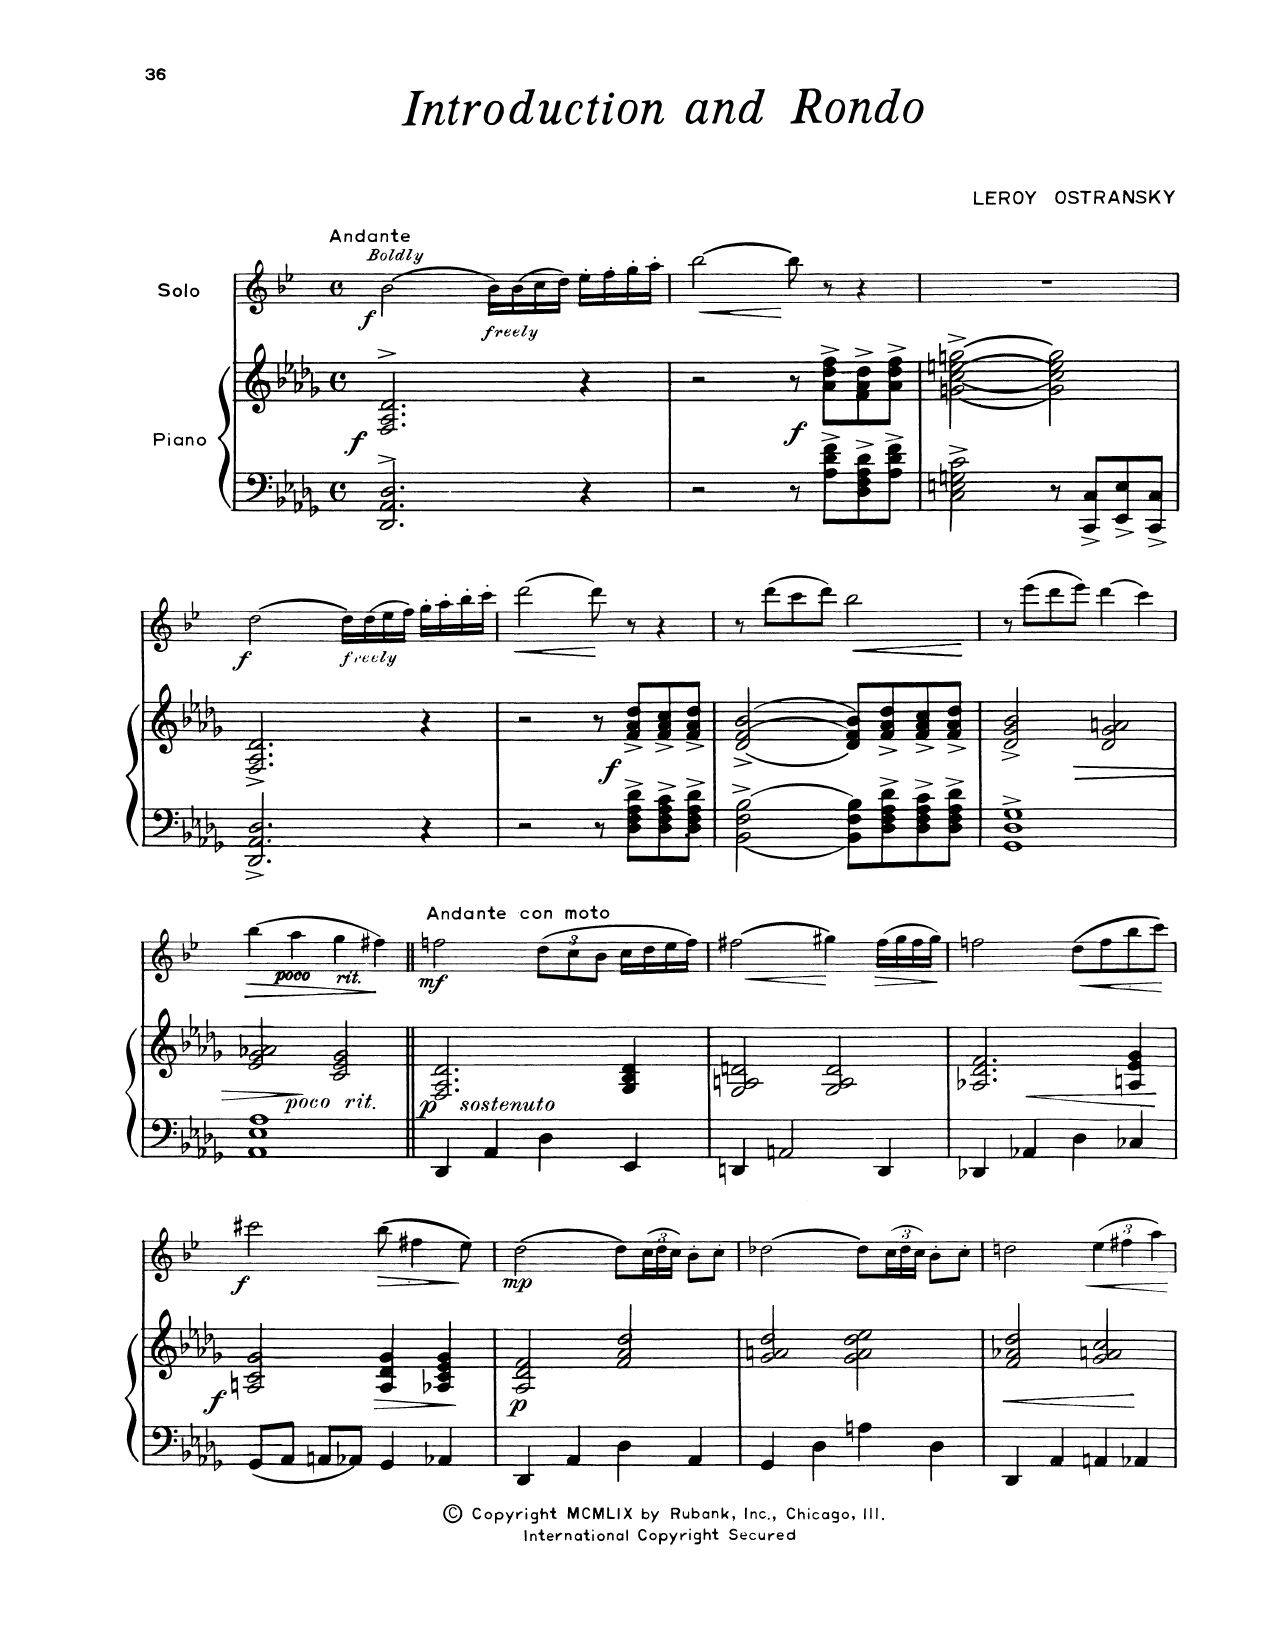 Download Leroy Ostransky Introduction And Rondo Sheet Music